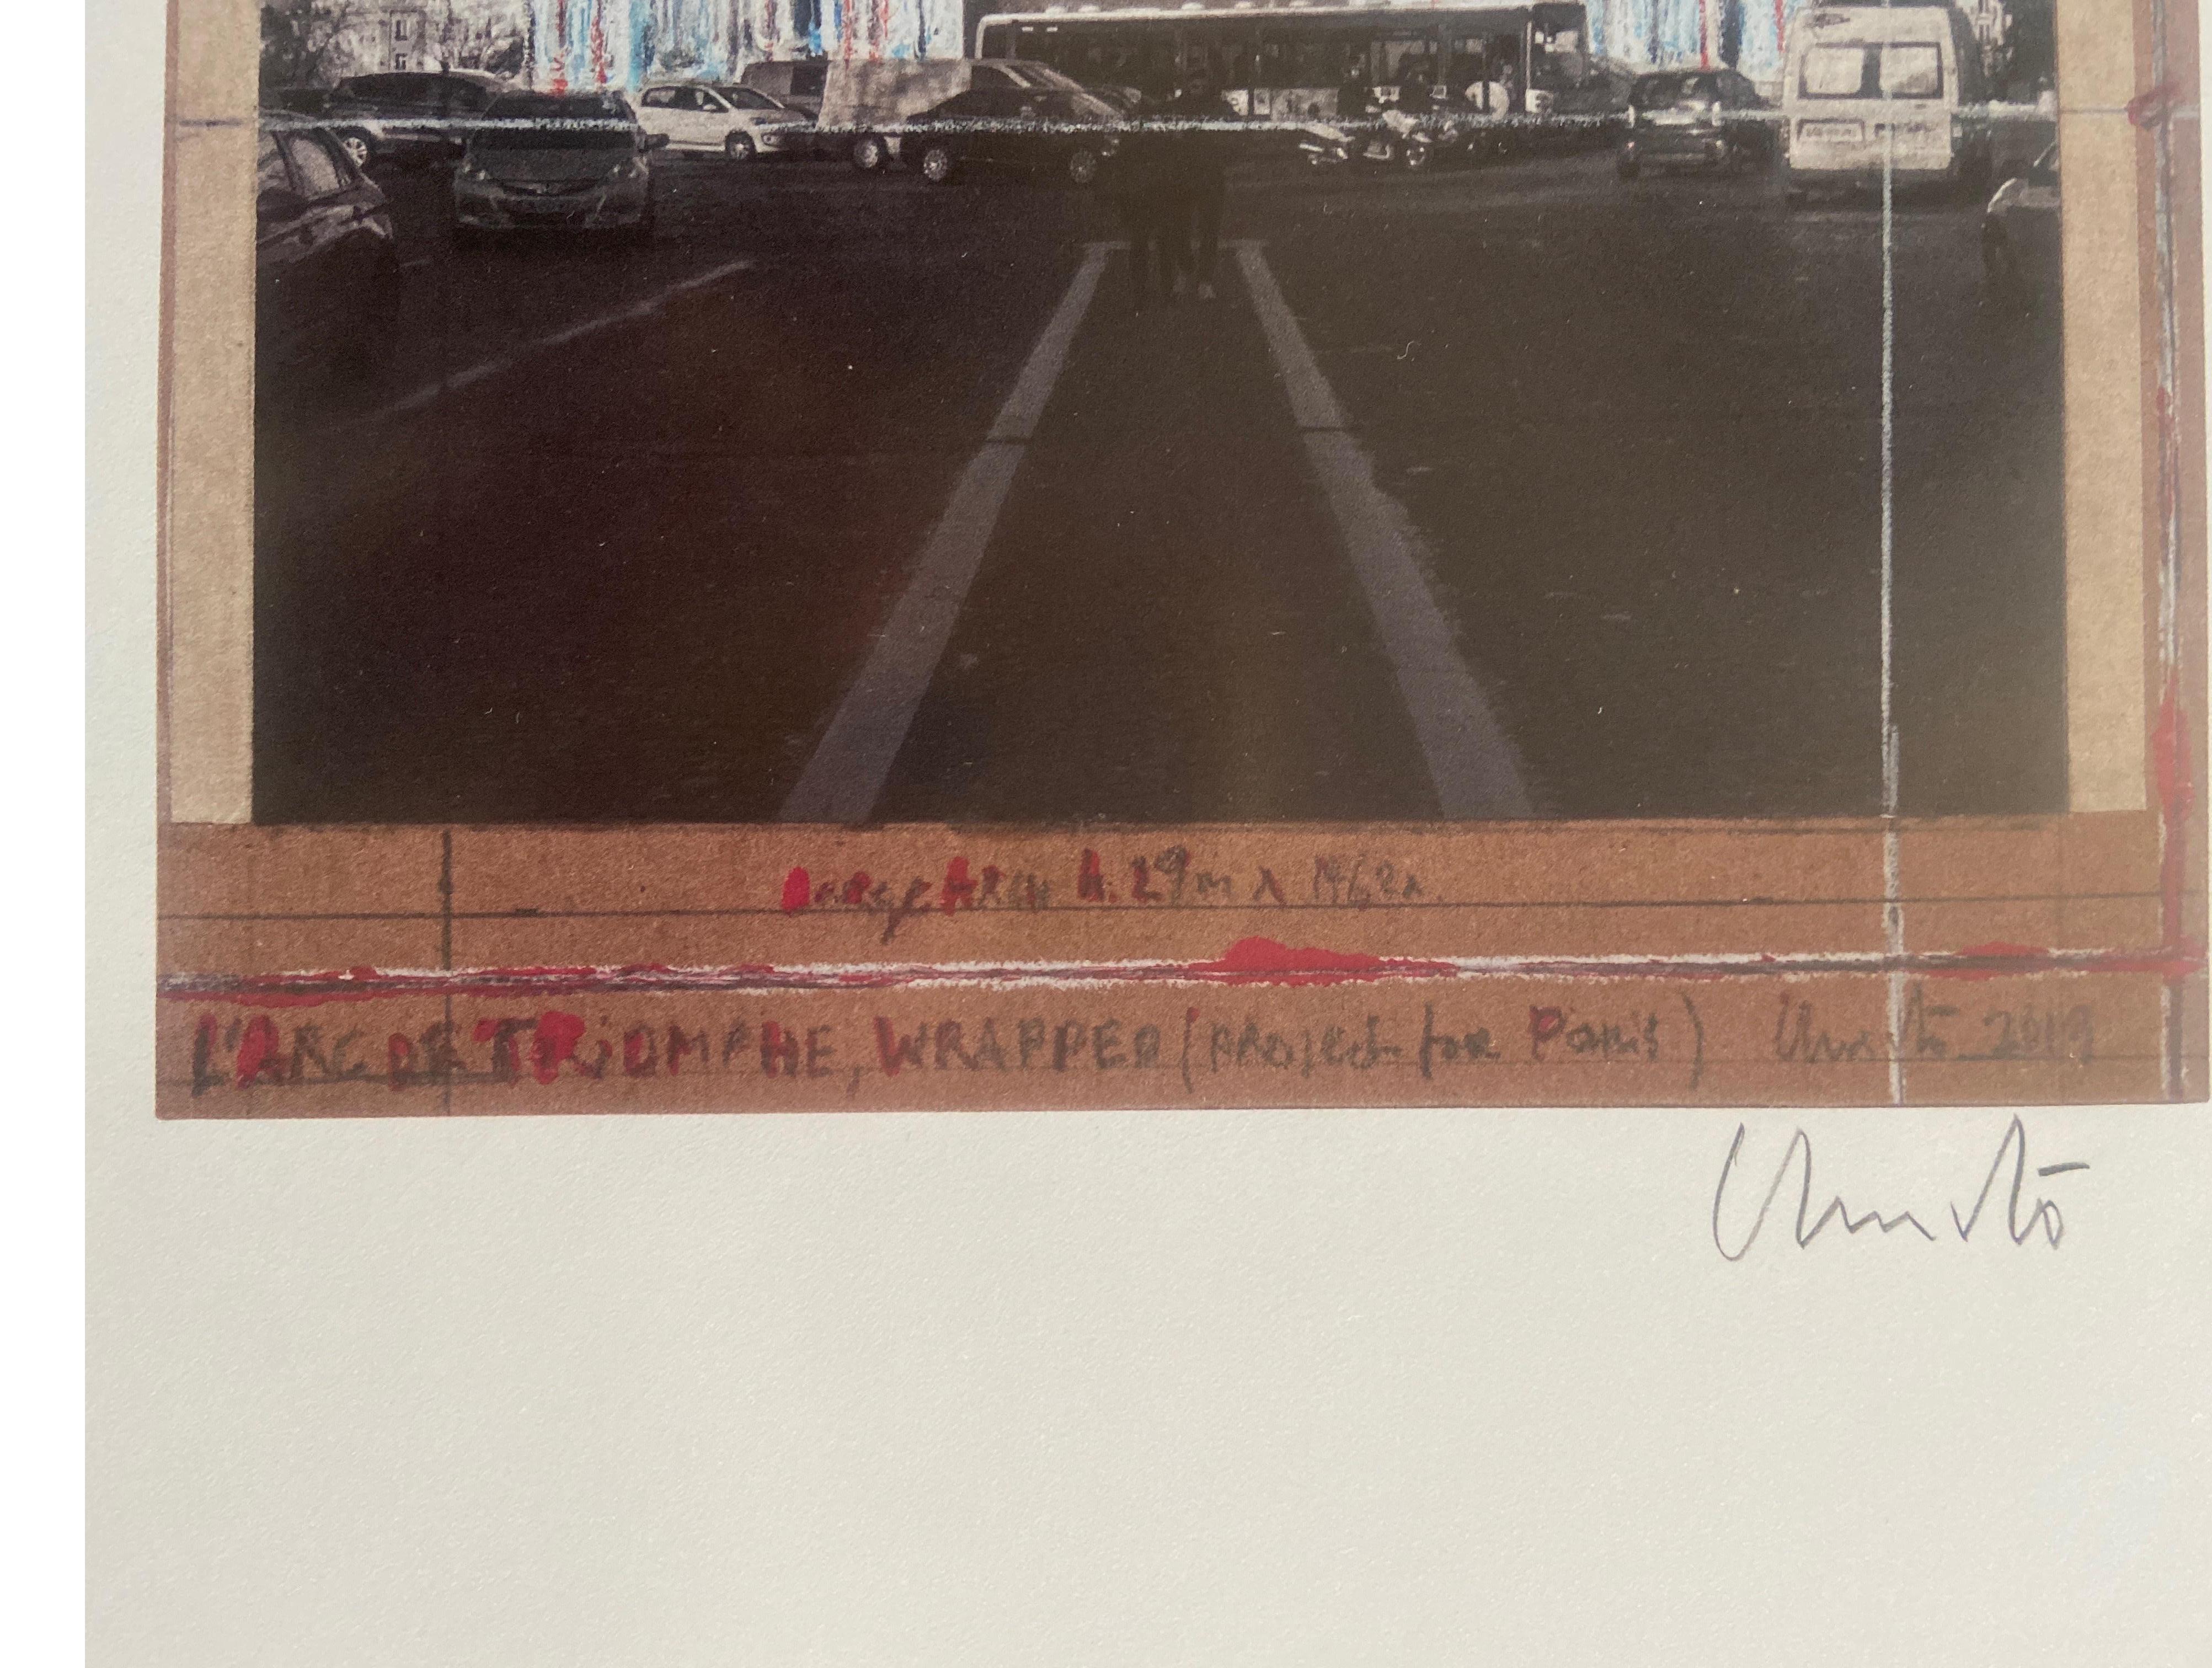 Christo Javacheff Print of L'Arc de Triomphe Wrapped Project Signed 2019 For Sale 3